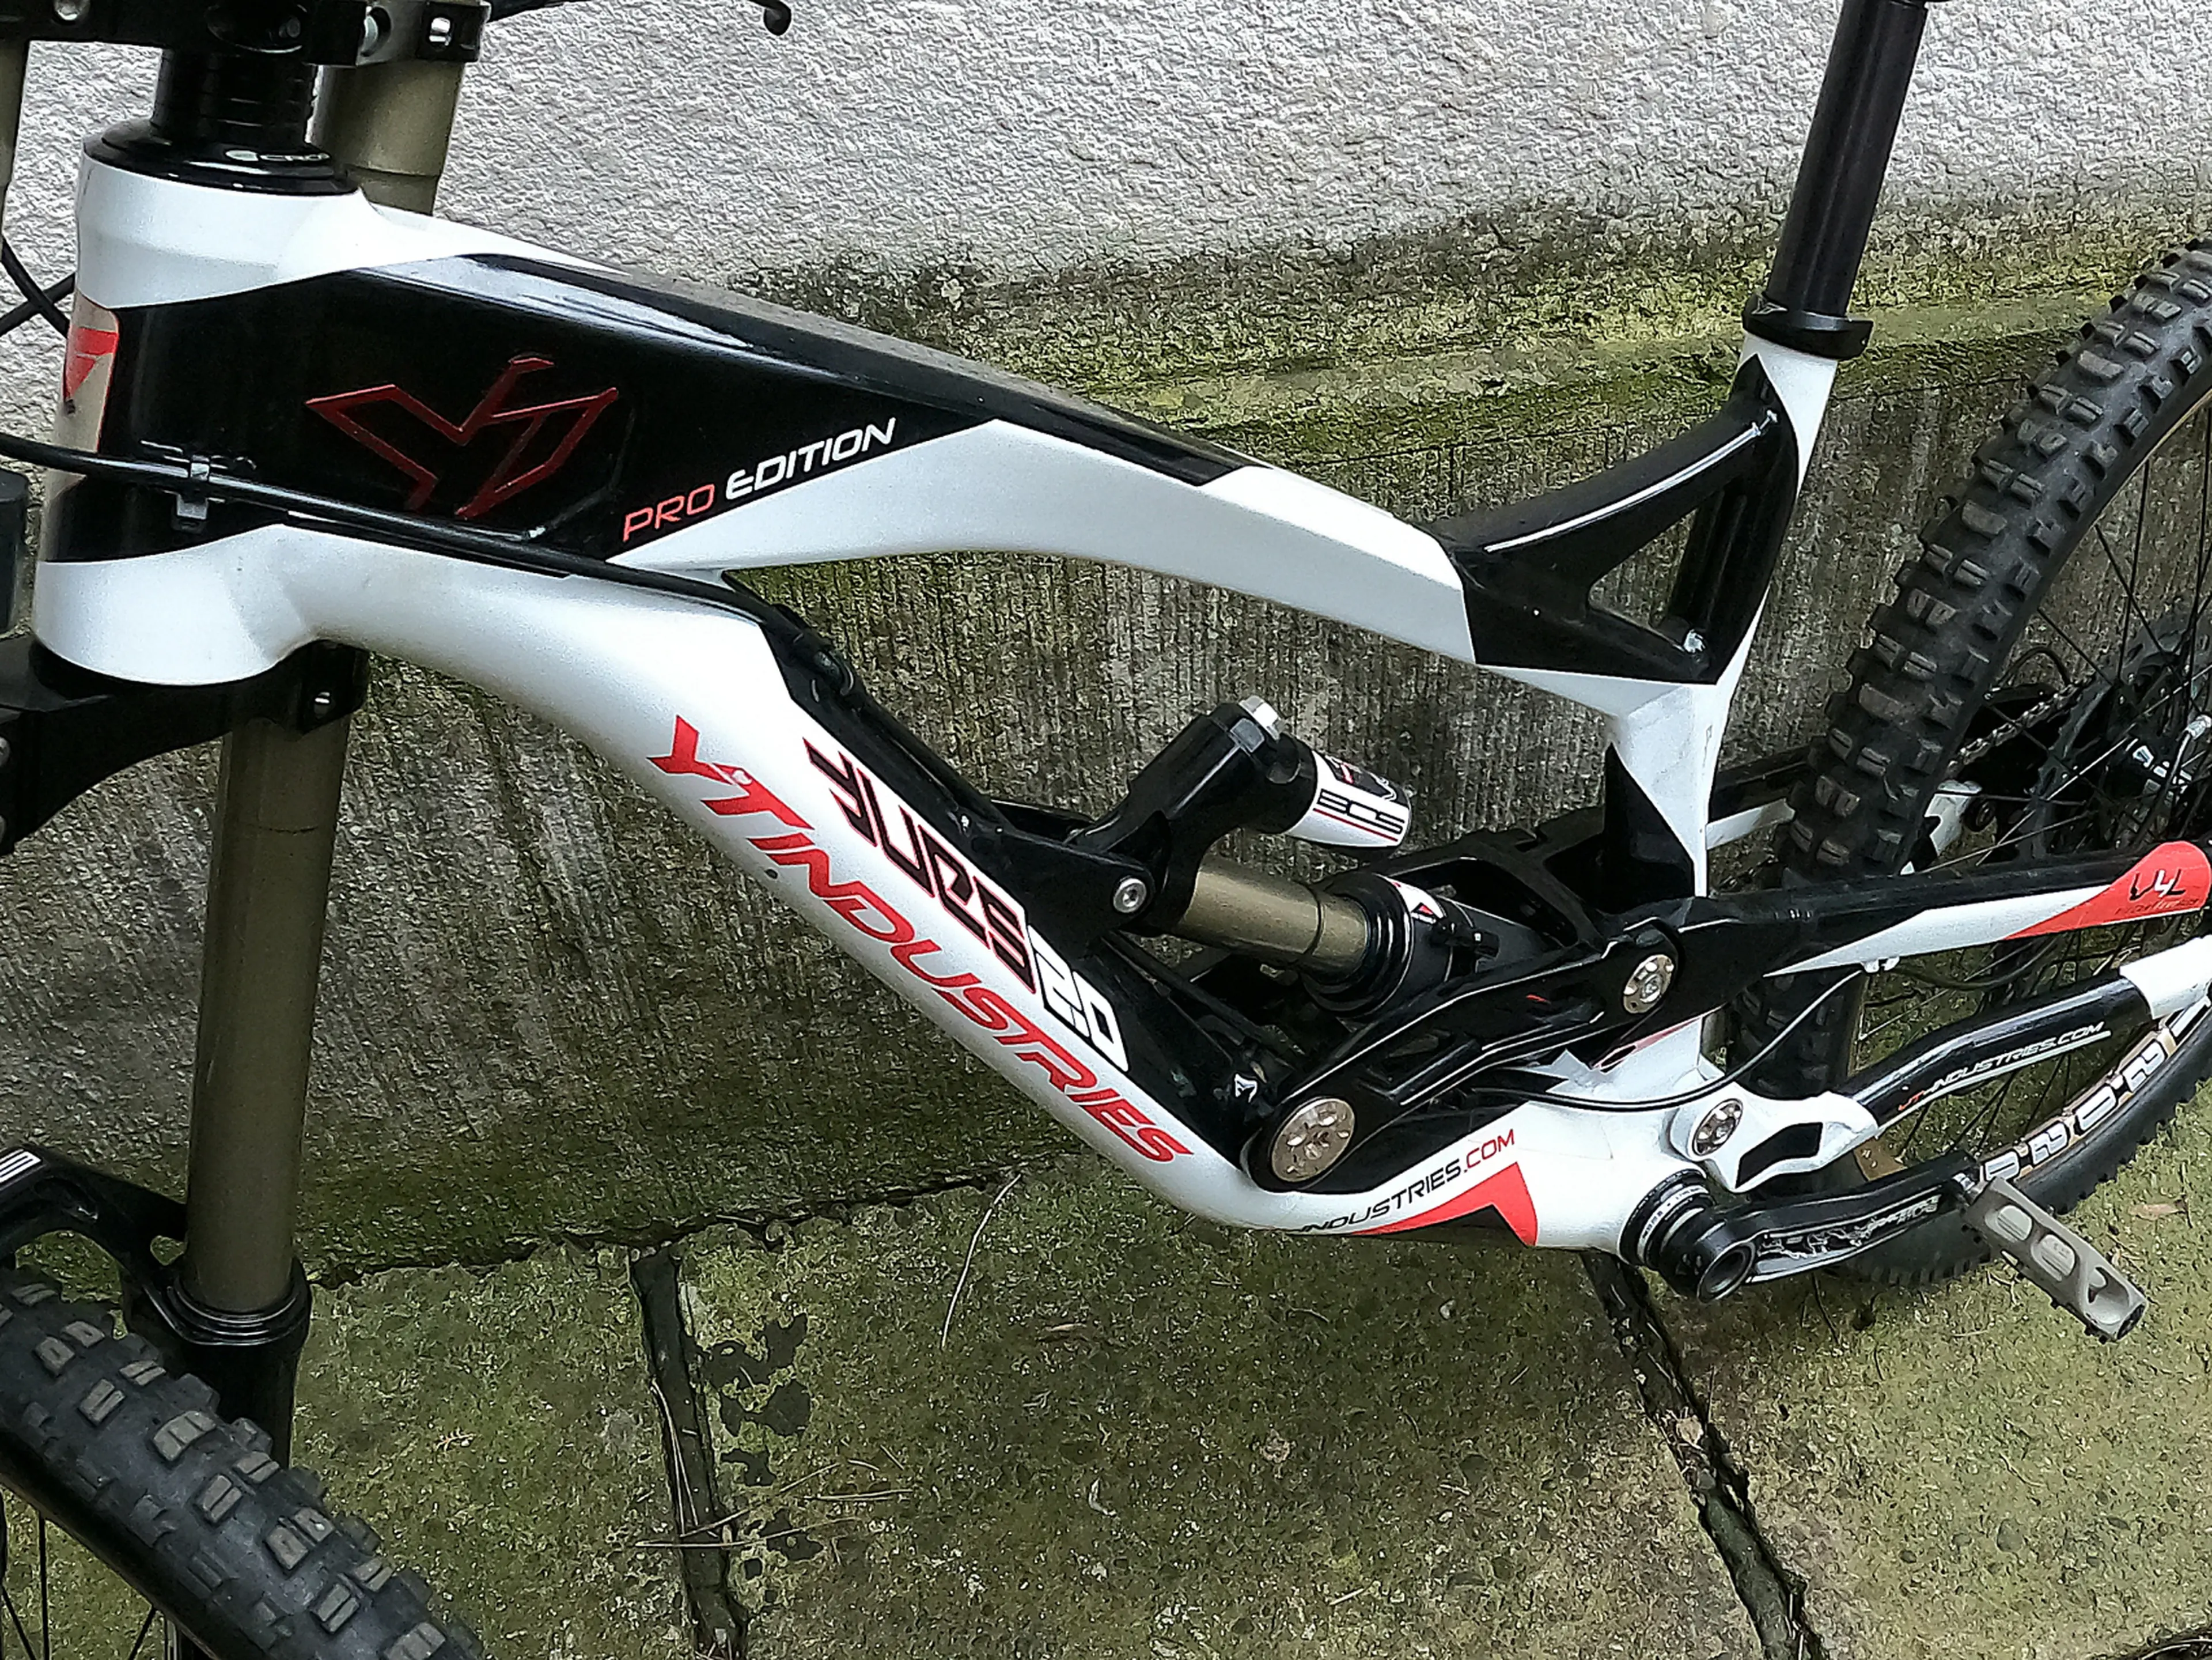 6. YT Industries Pro edition